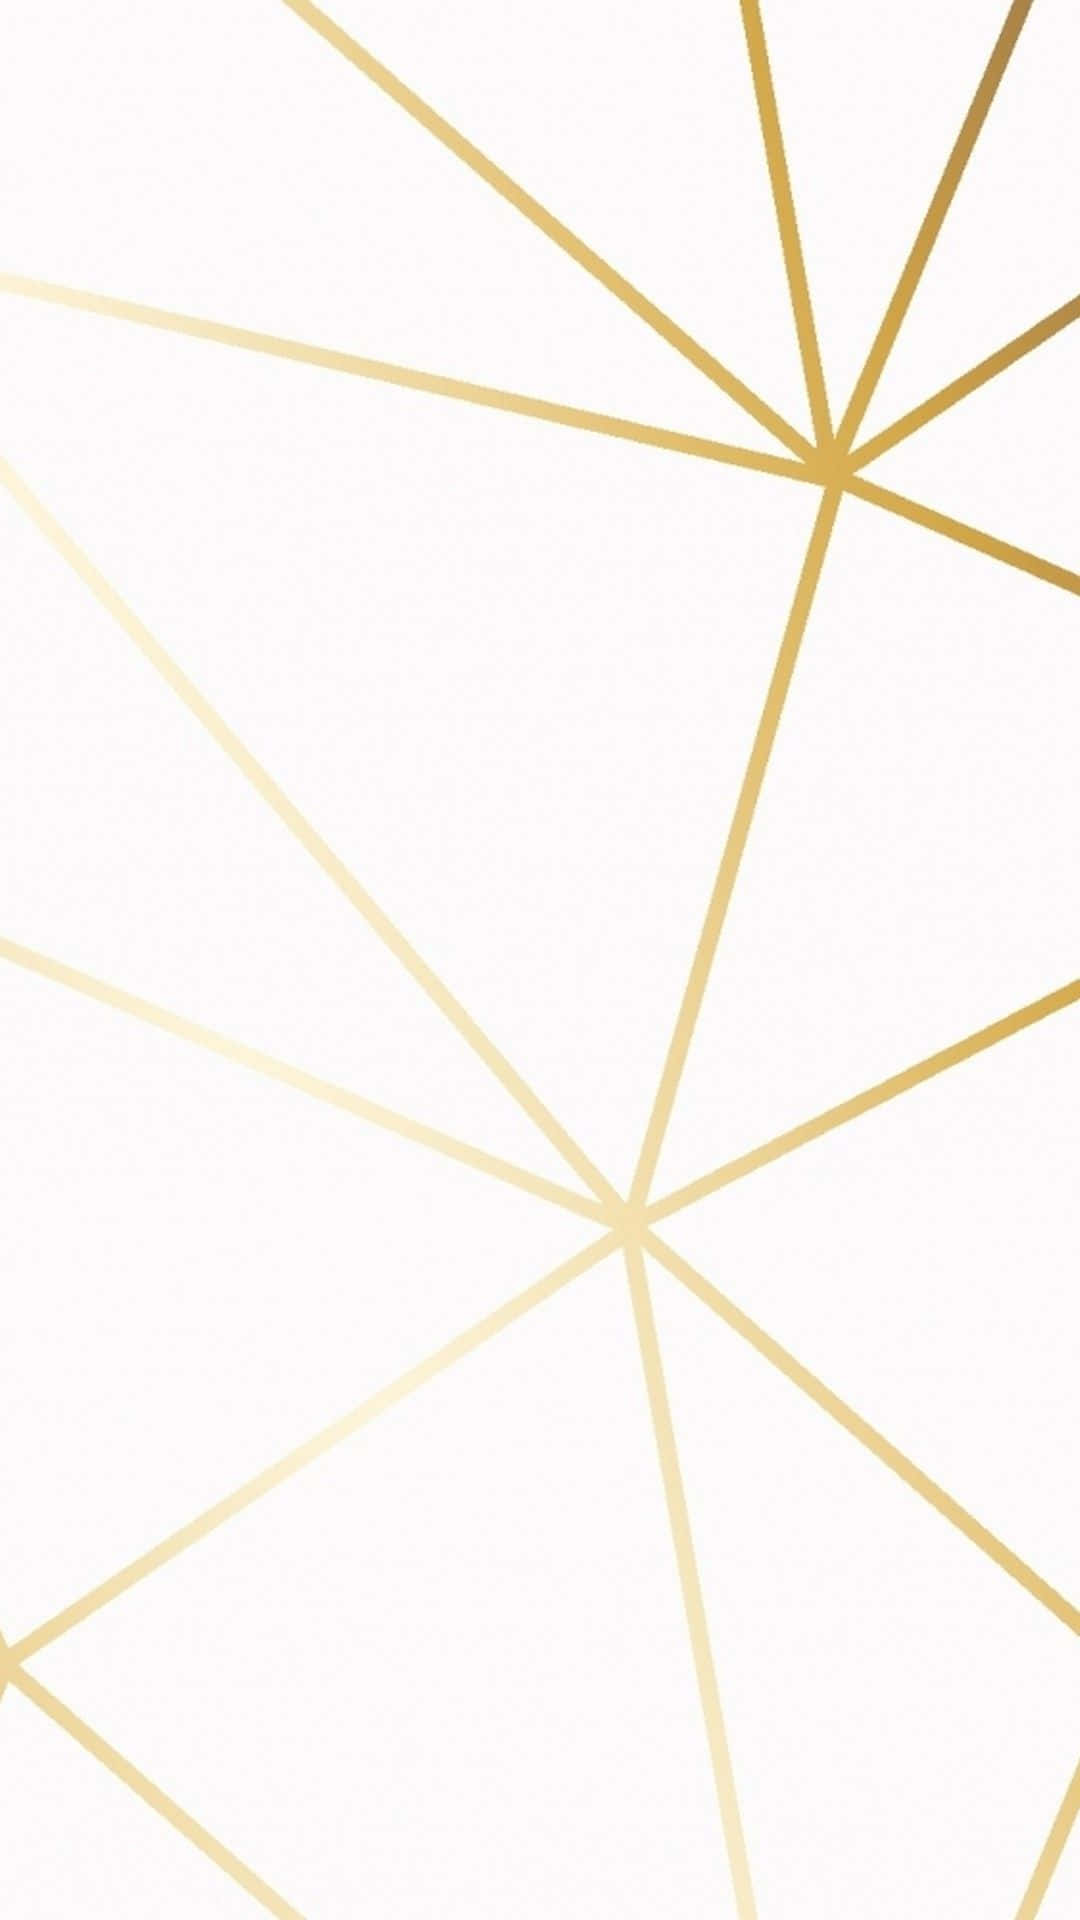 Shiny Gold and White Background